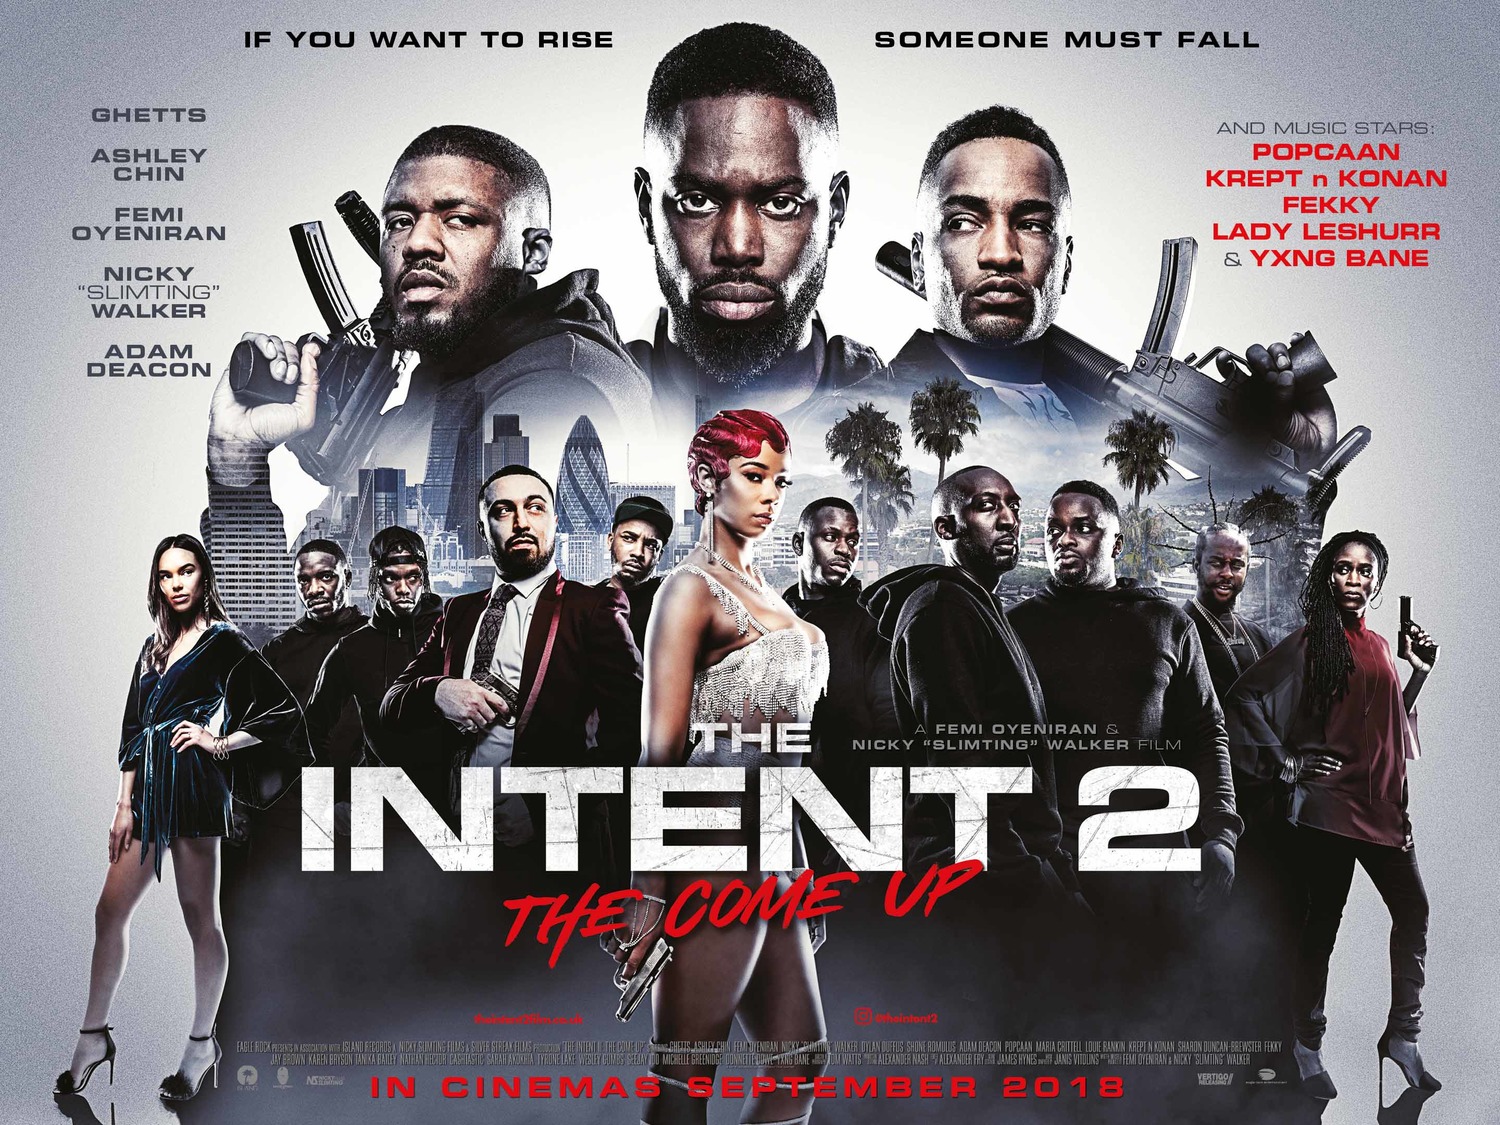 Extra Large Movie Poster Image for The Intent 2: The Come Up 